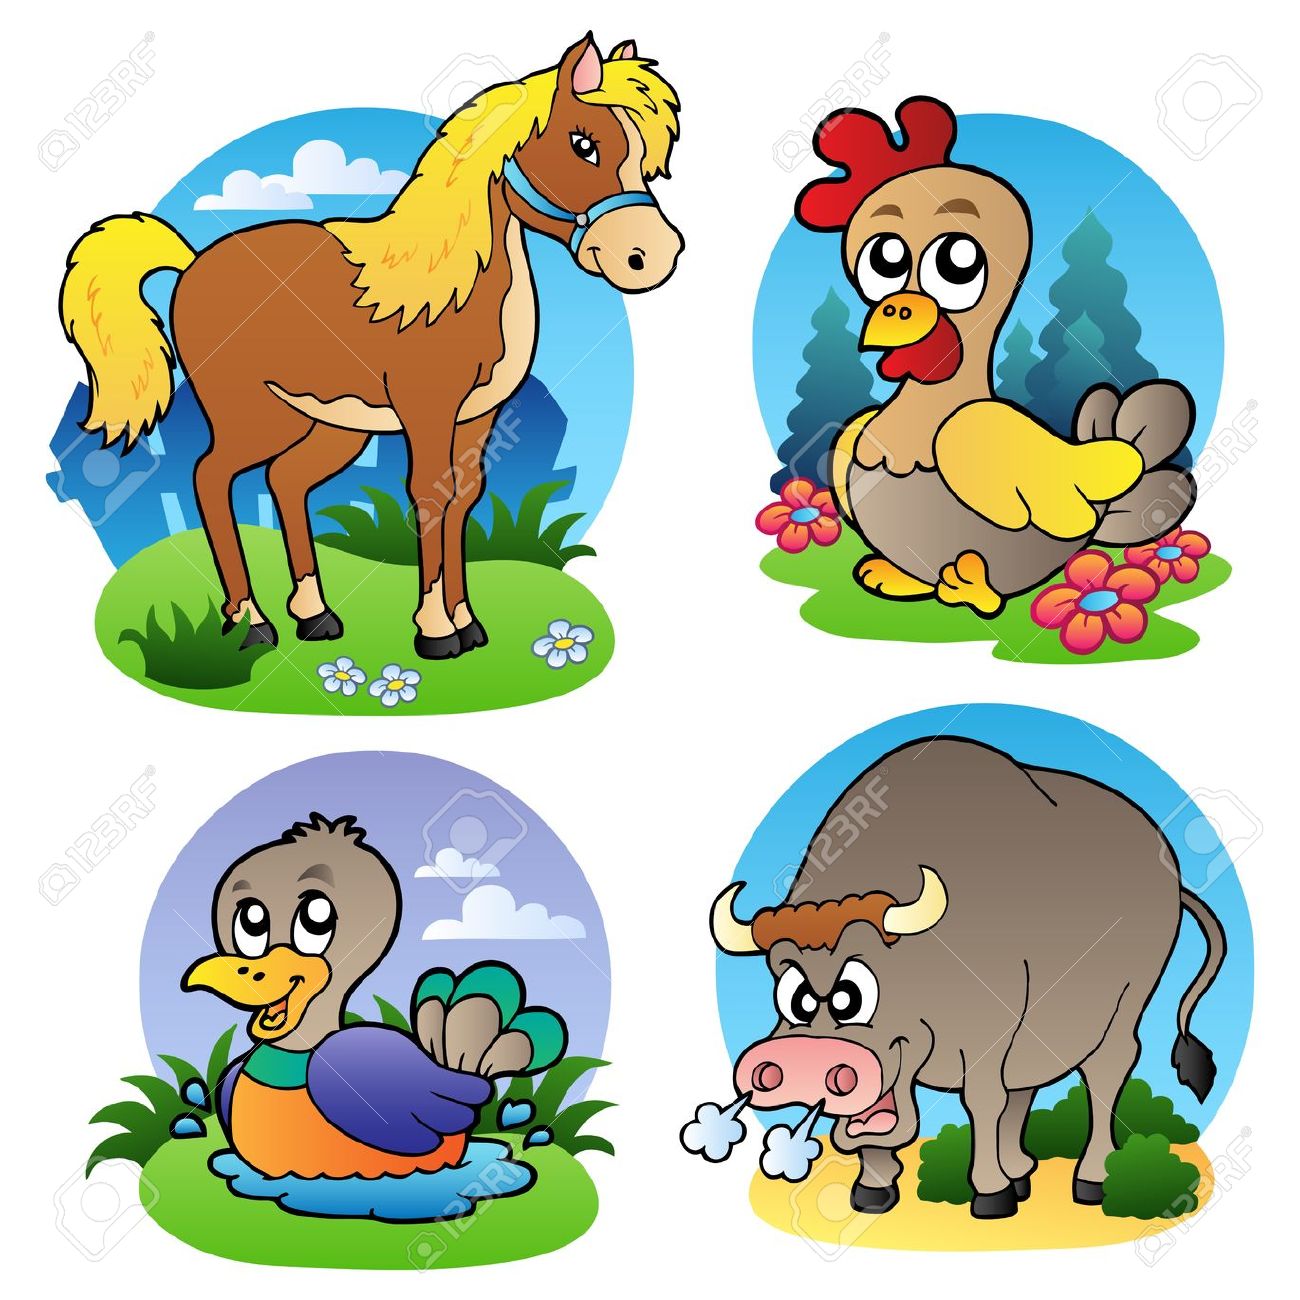 Domestic animal clipart 20 free Cliparts | Download images on